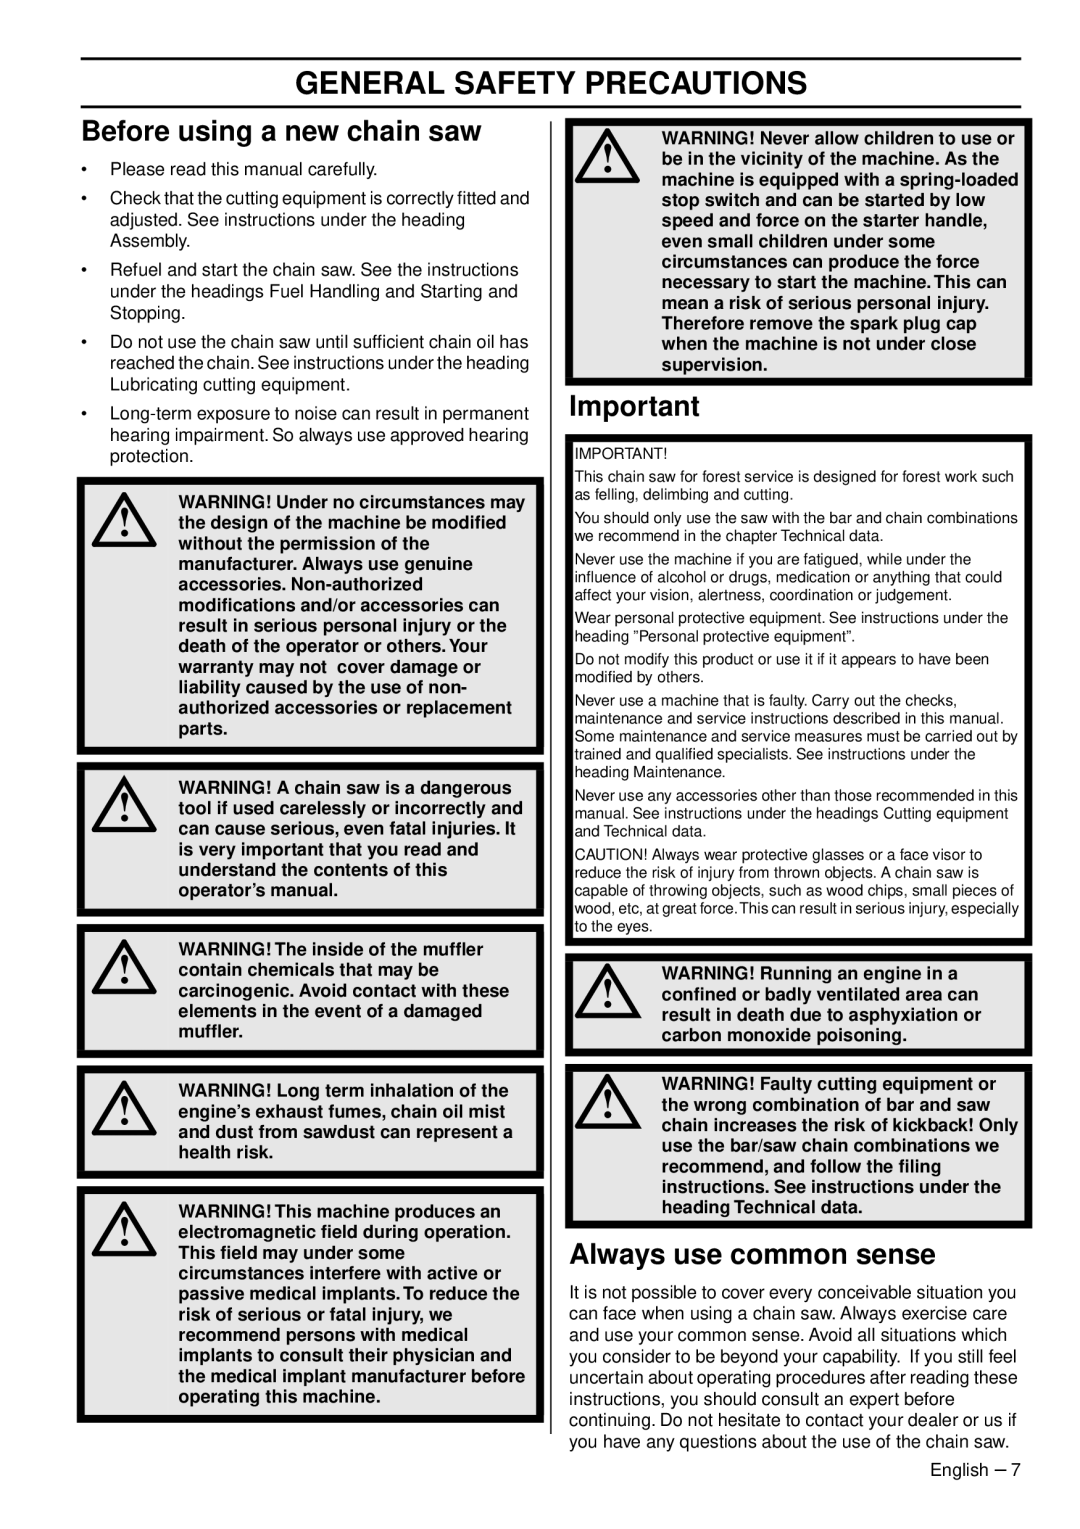 Husqvarna 353G General Safety Precautions, Before using a new chain saw, Always use common sense, parts, operator’s manual 